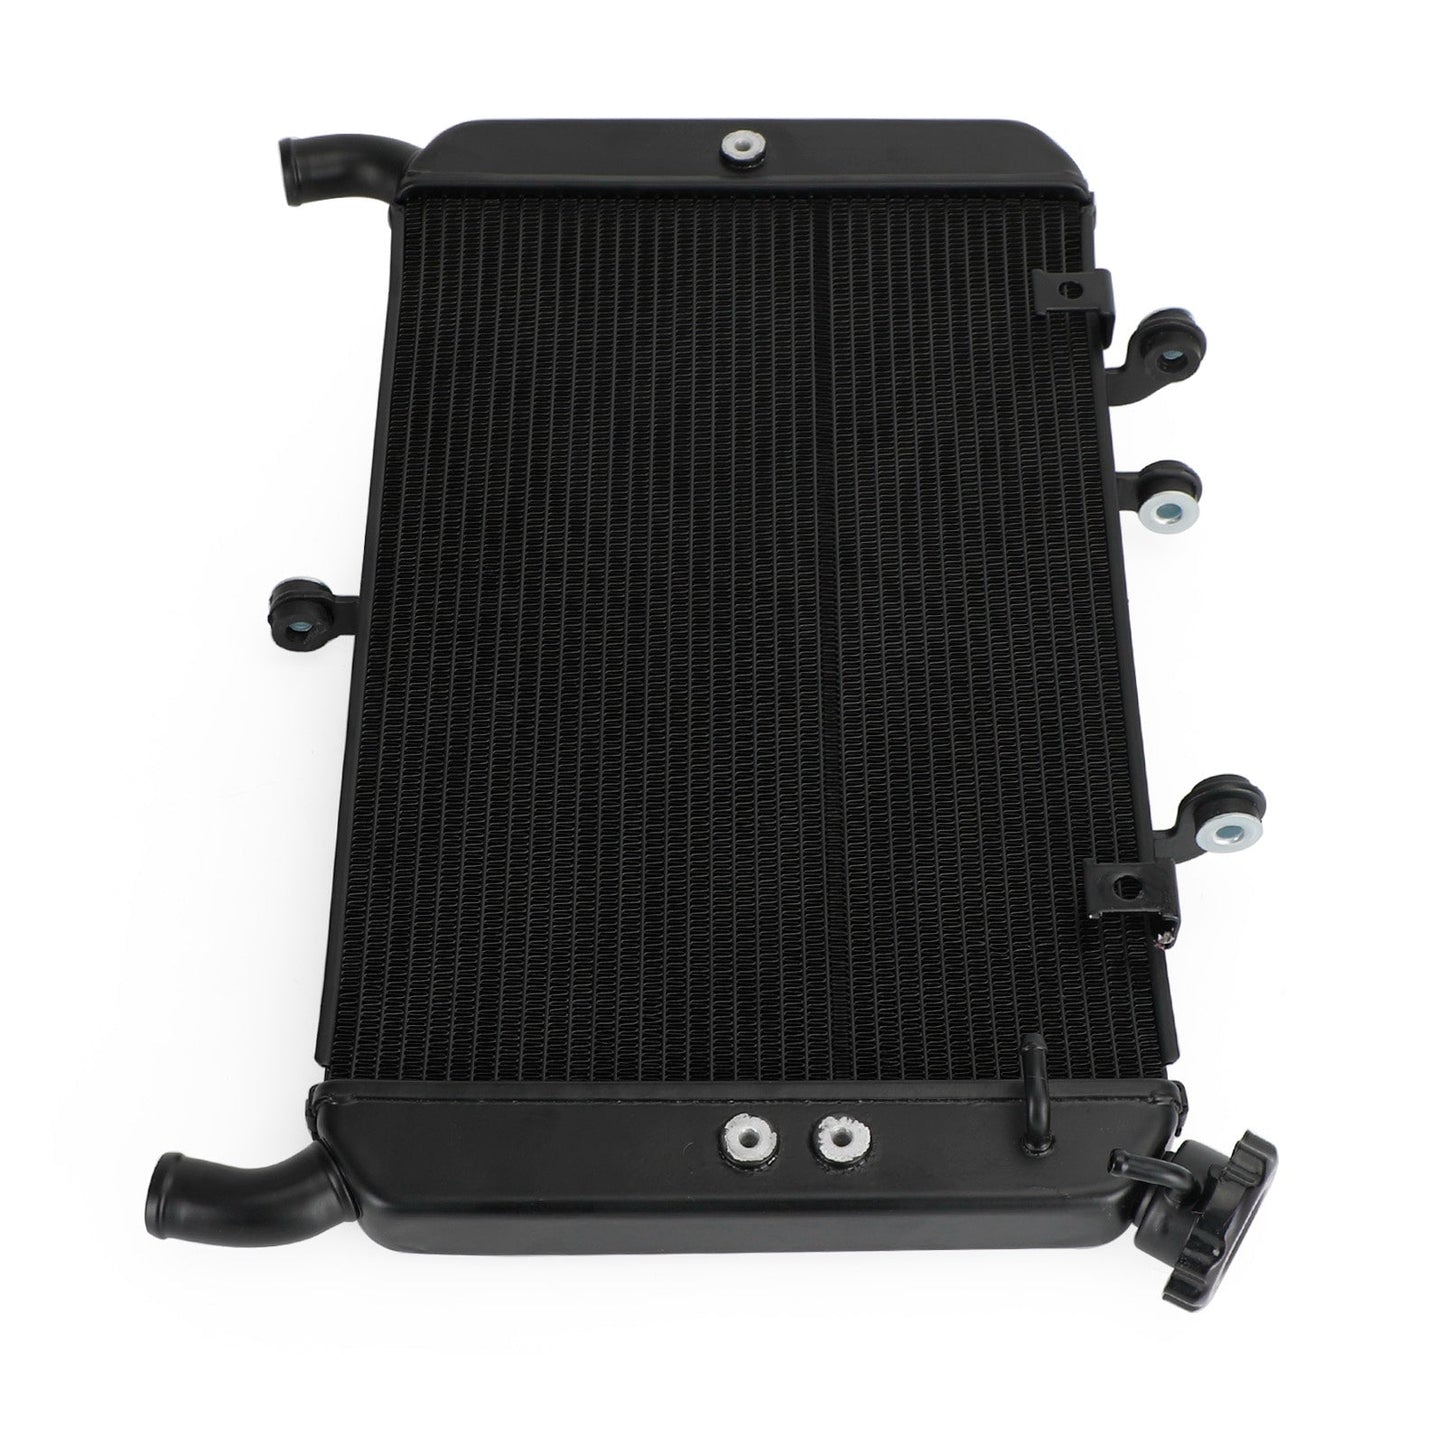 Core Engine Water Cooling Cooler Radiator For Yamaha MT-09 FZ09 2013-2016